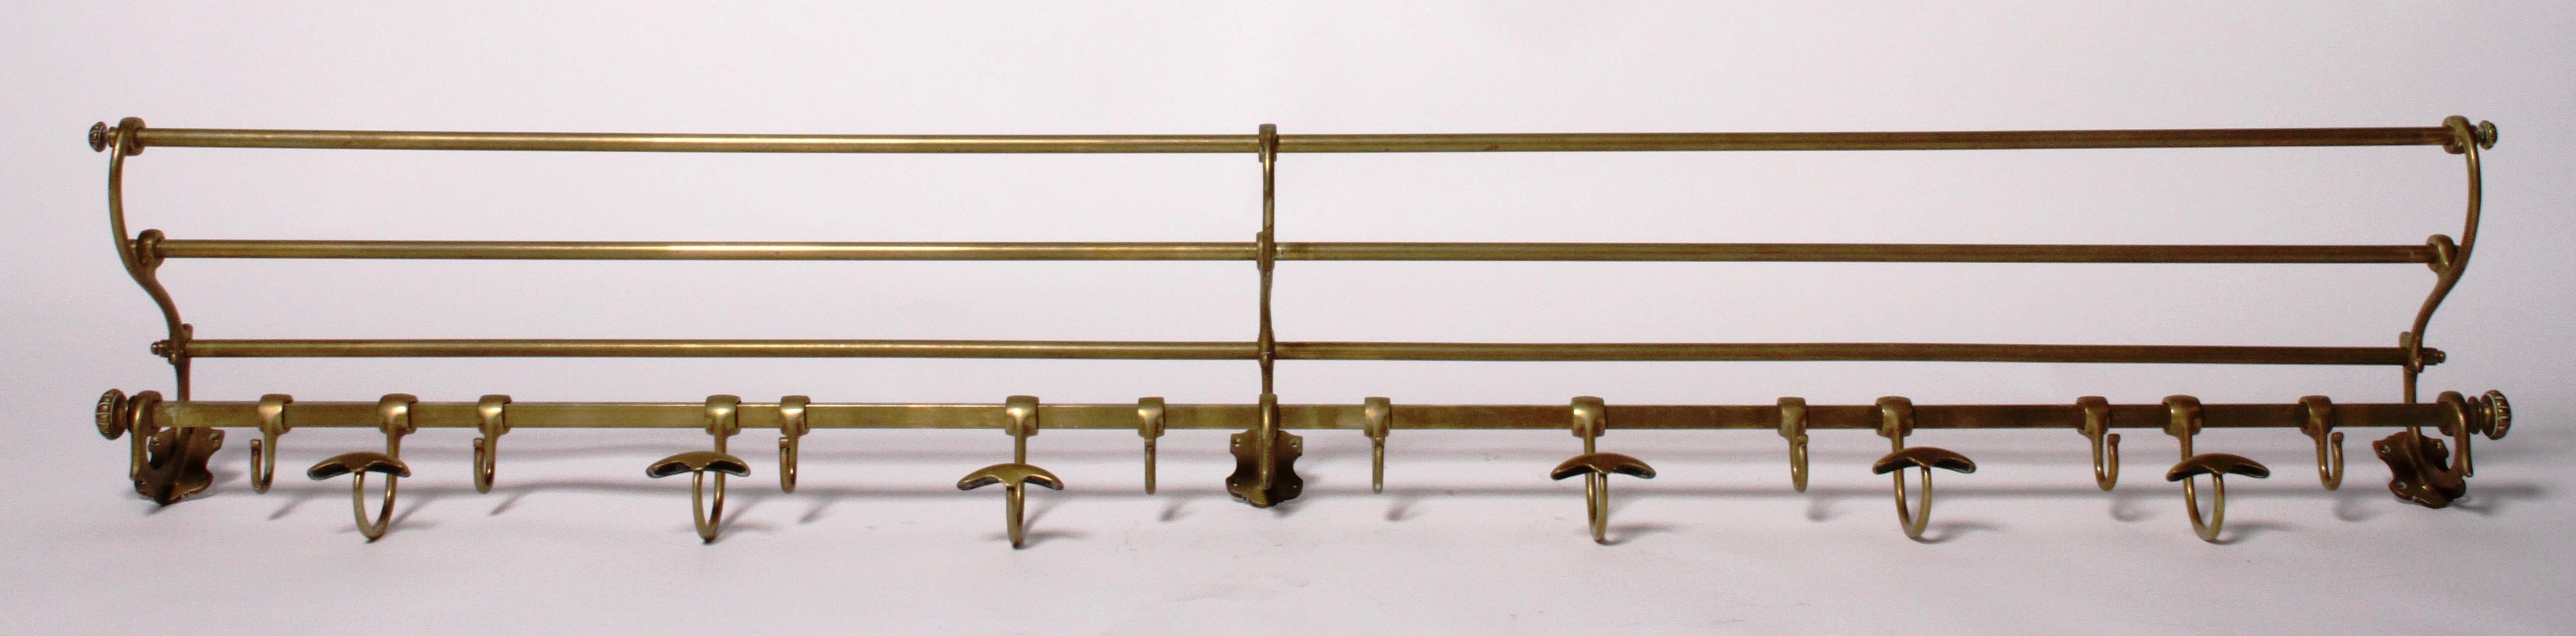 This beautiful piece originated from the early 1900s in France and was once used as a coat a luggage rack on a train. This brass metal vintage rack is wall mounted and has adjustable coat hooks that slide across the bottom rod.